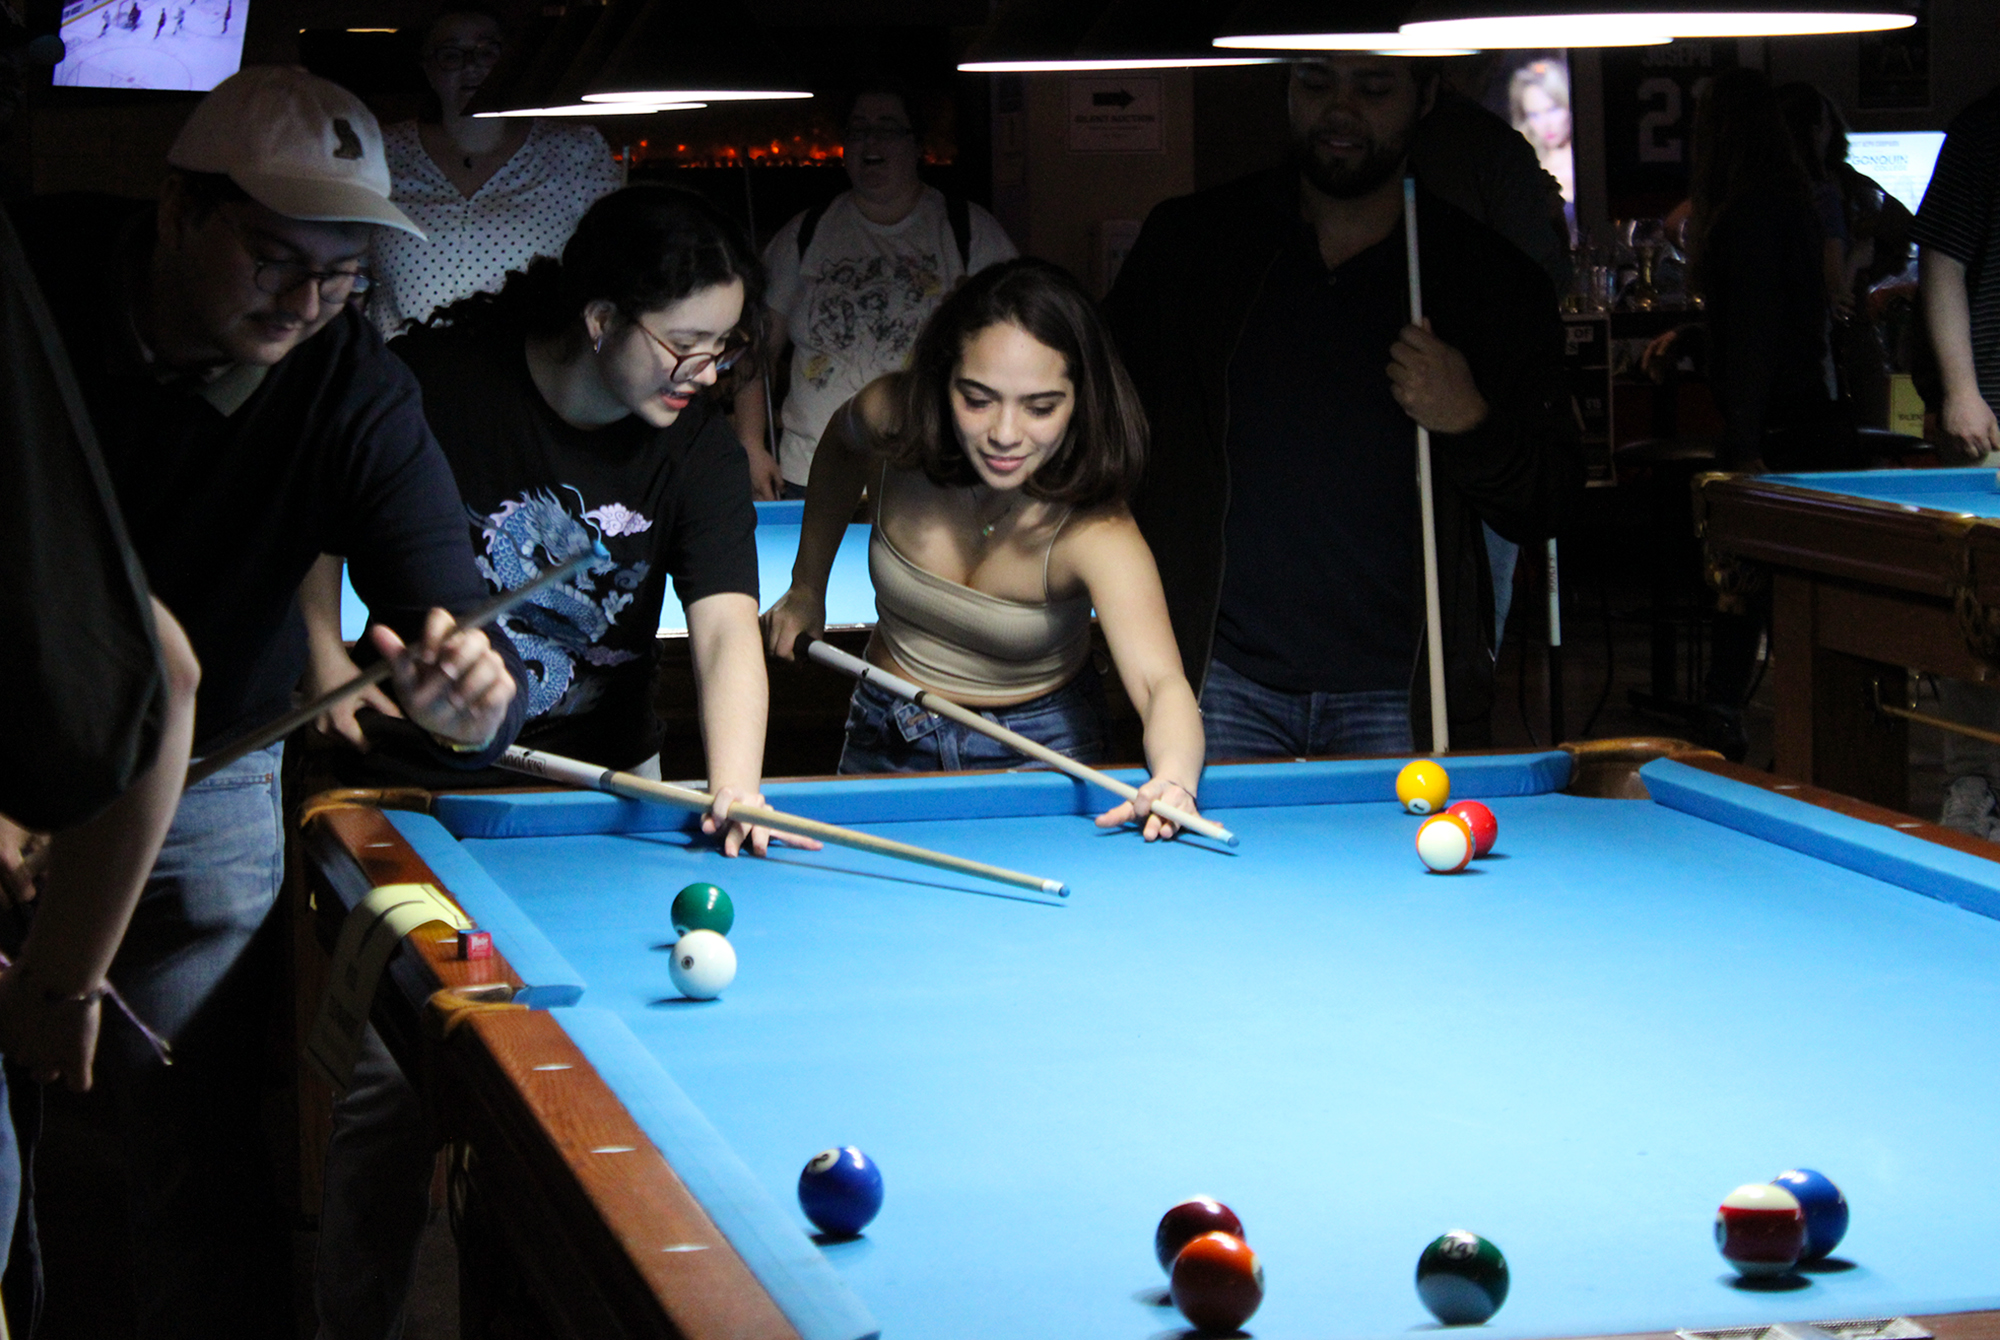 Sarah Porras, a public relations student, on the right, being taught how to hold the cue.